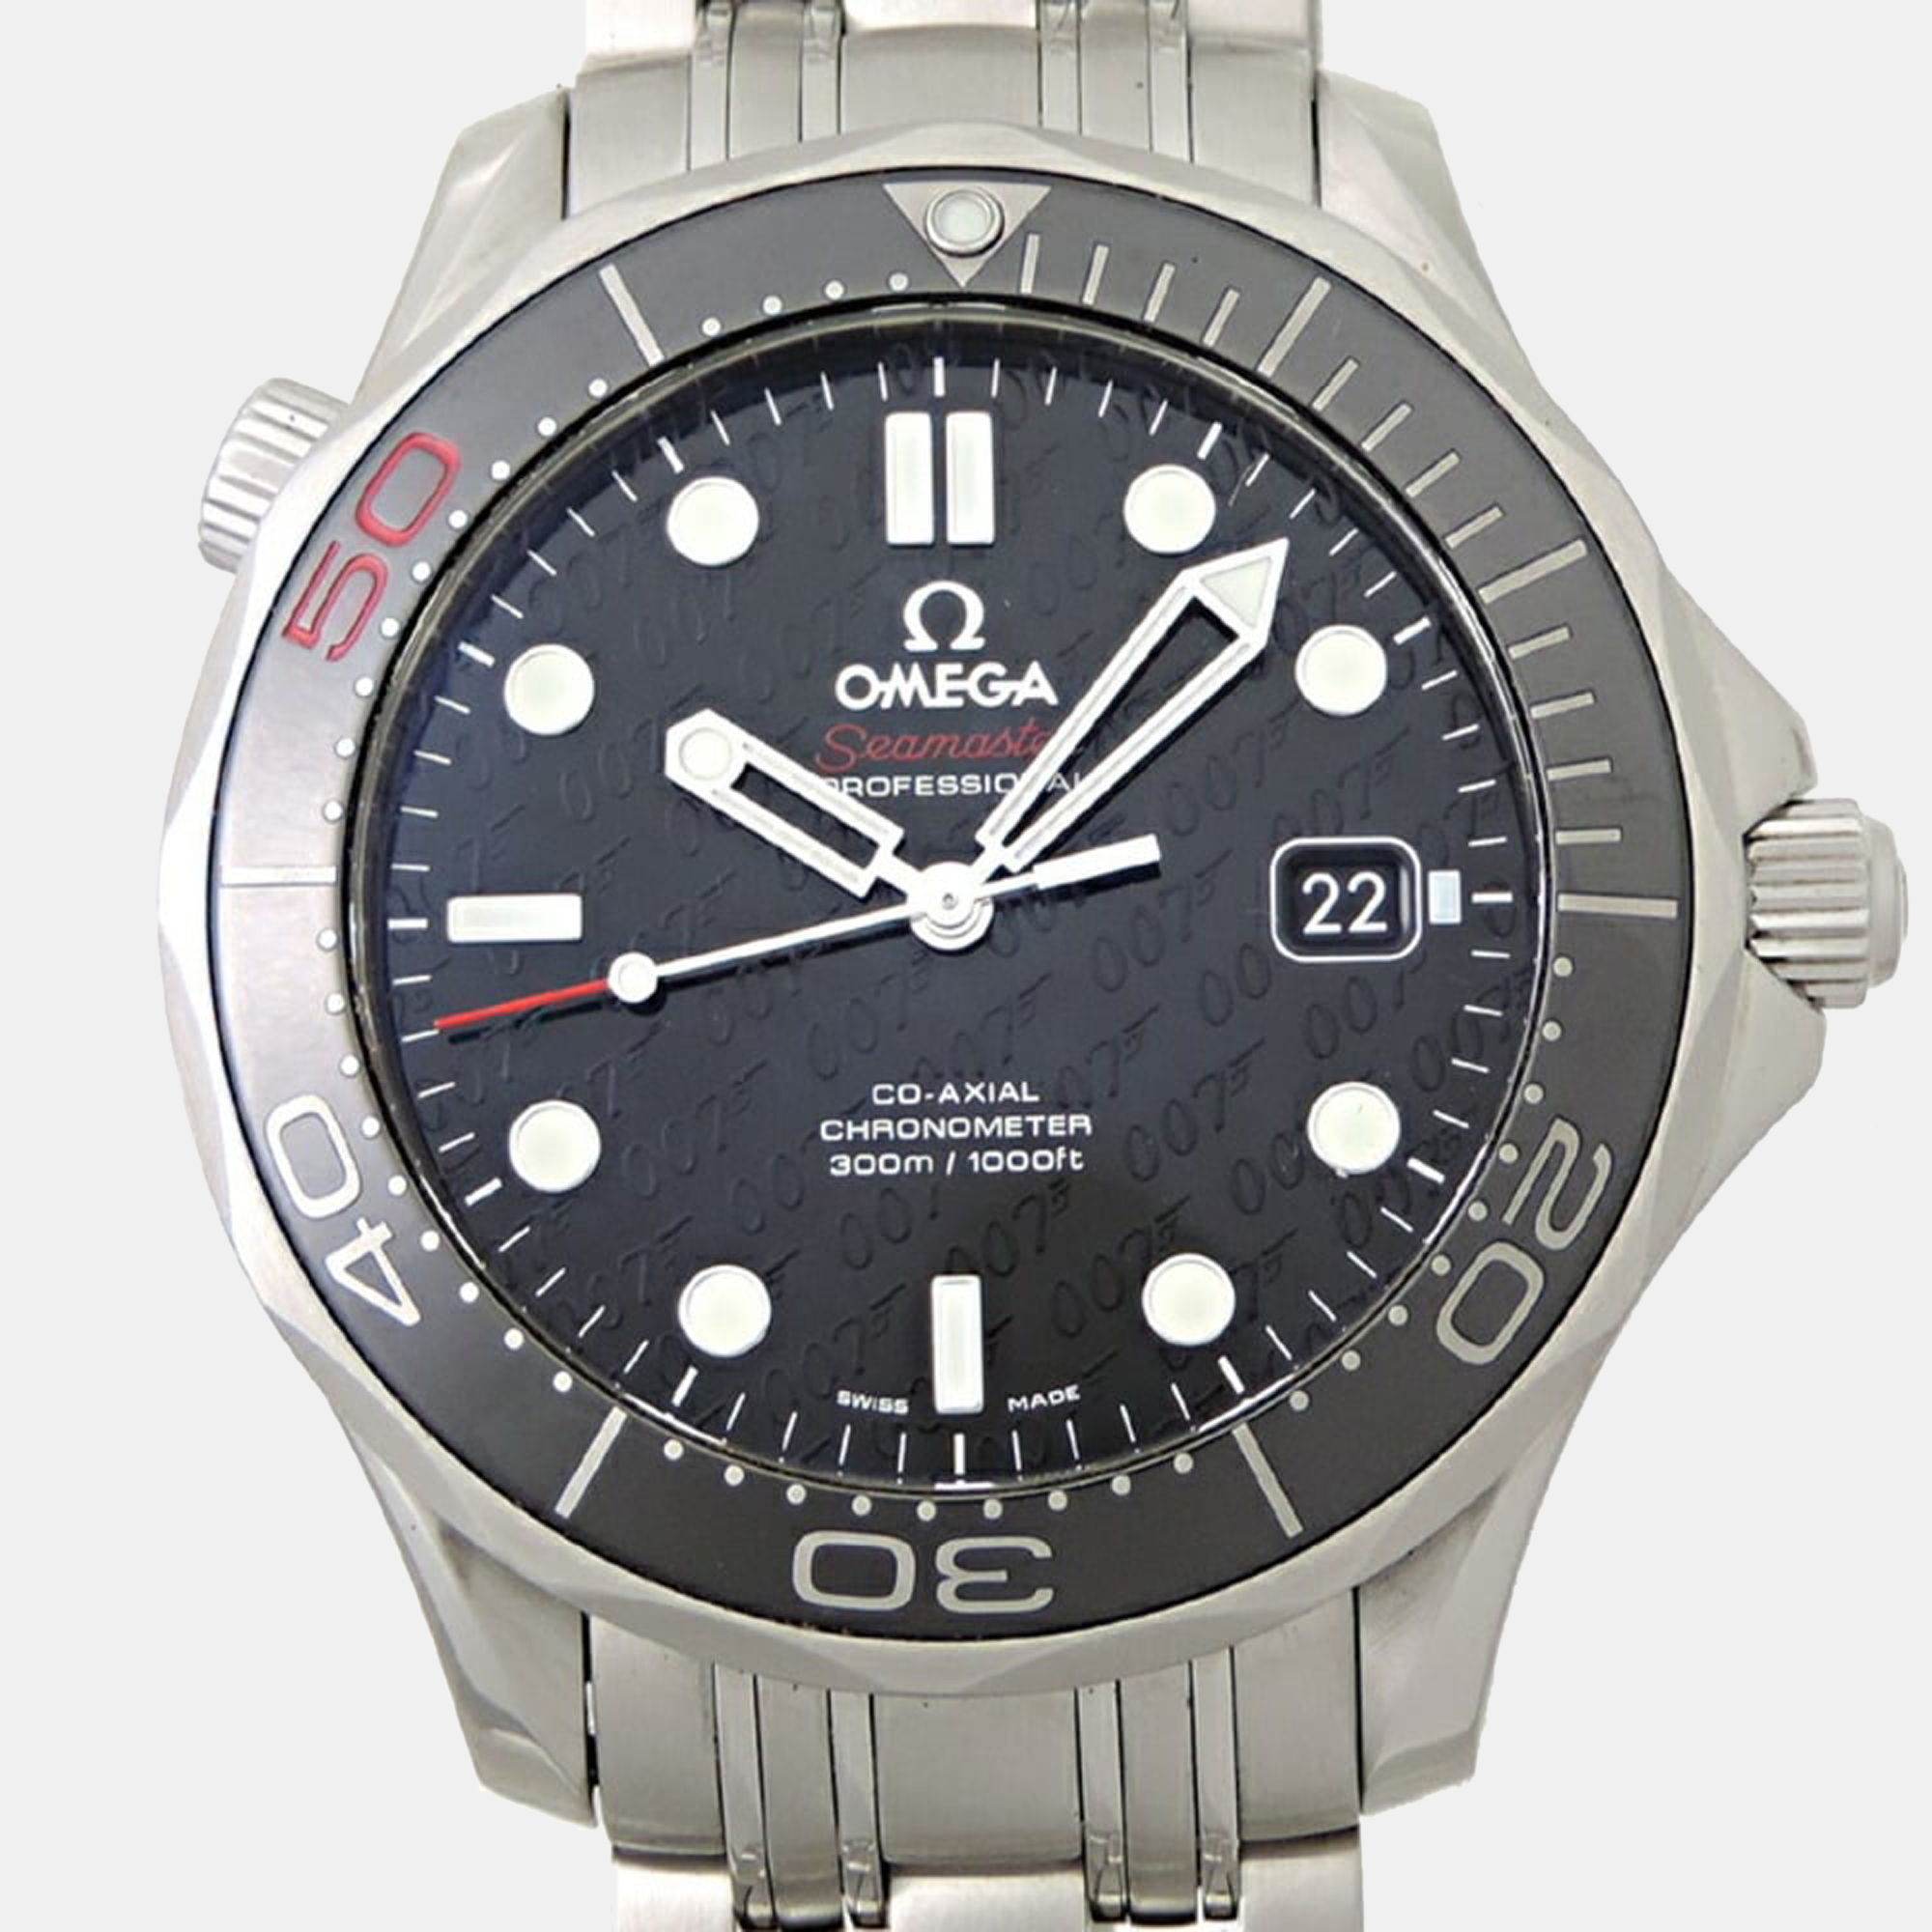 Omega Black Stainless Steel Seamaster Diver 212.30.41.20.01.005 Automatic Men's Wristwatch 41 Mm